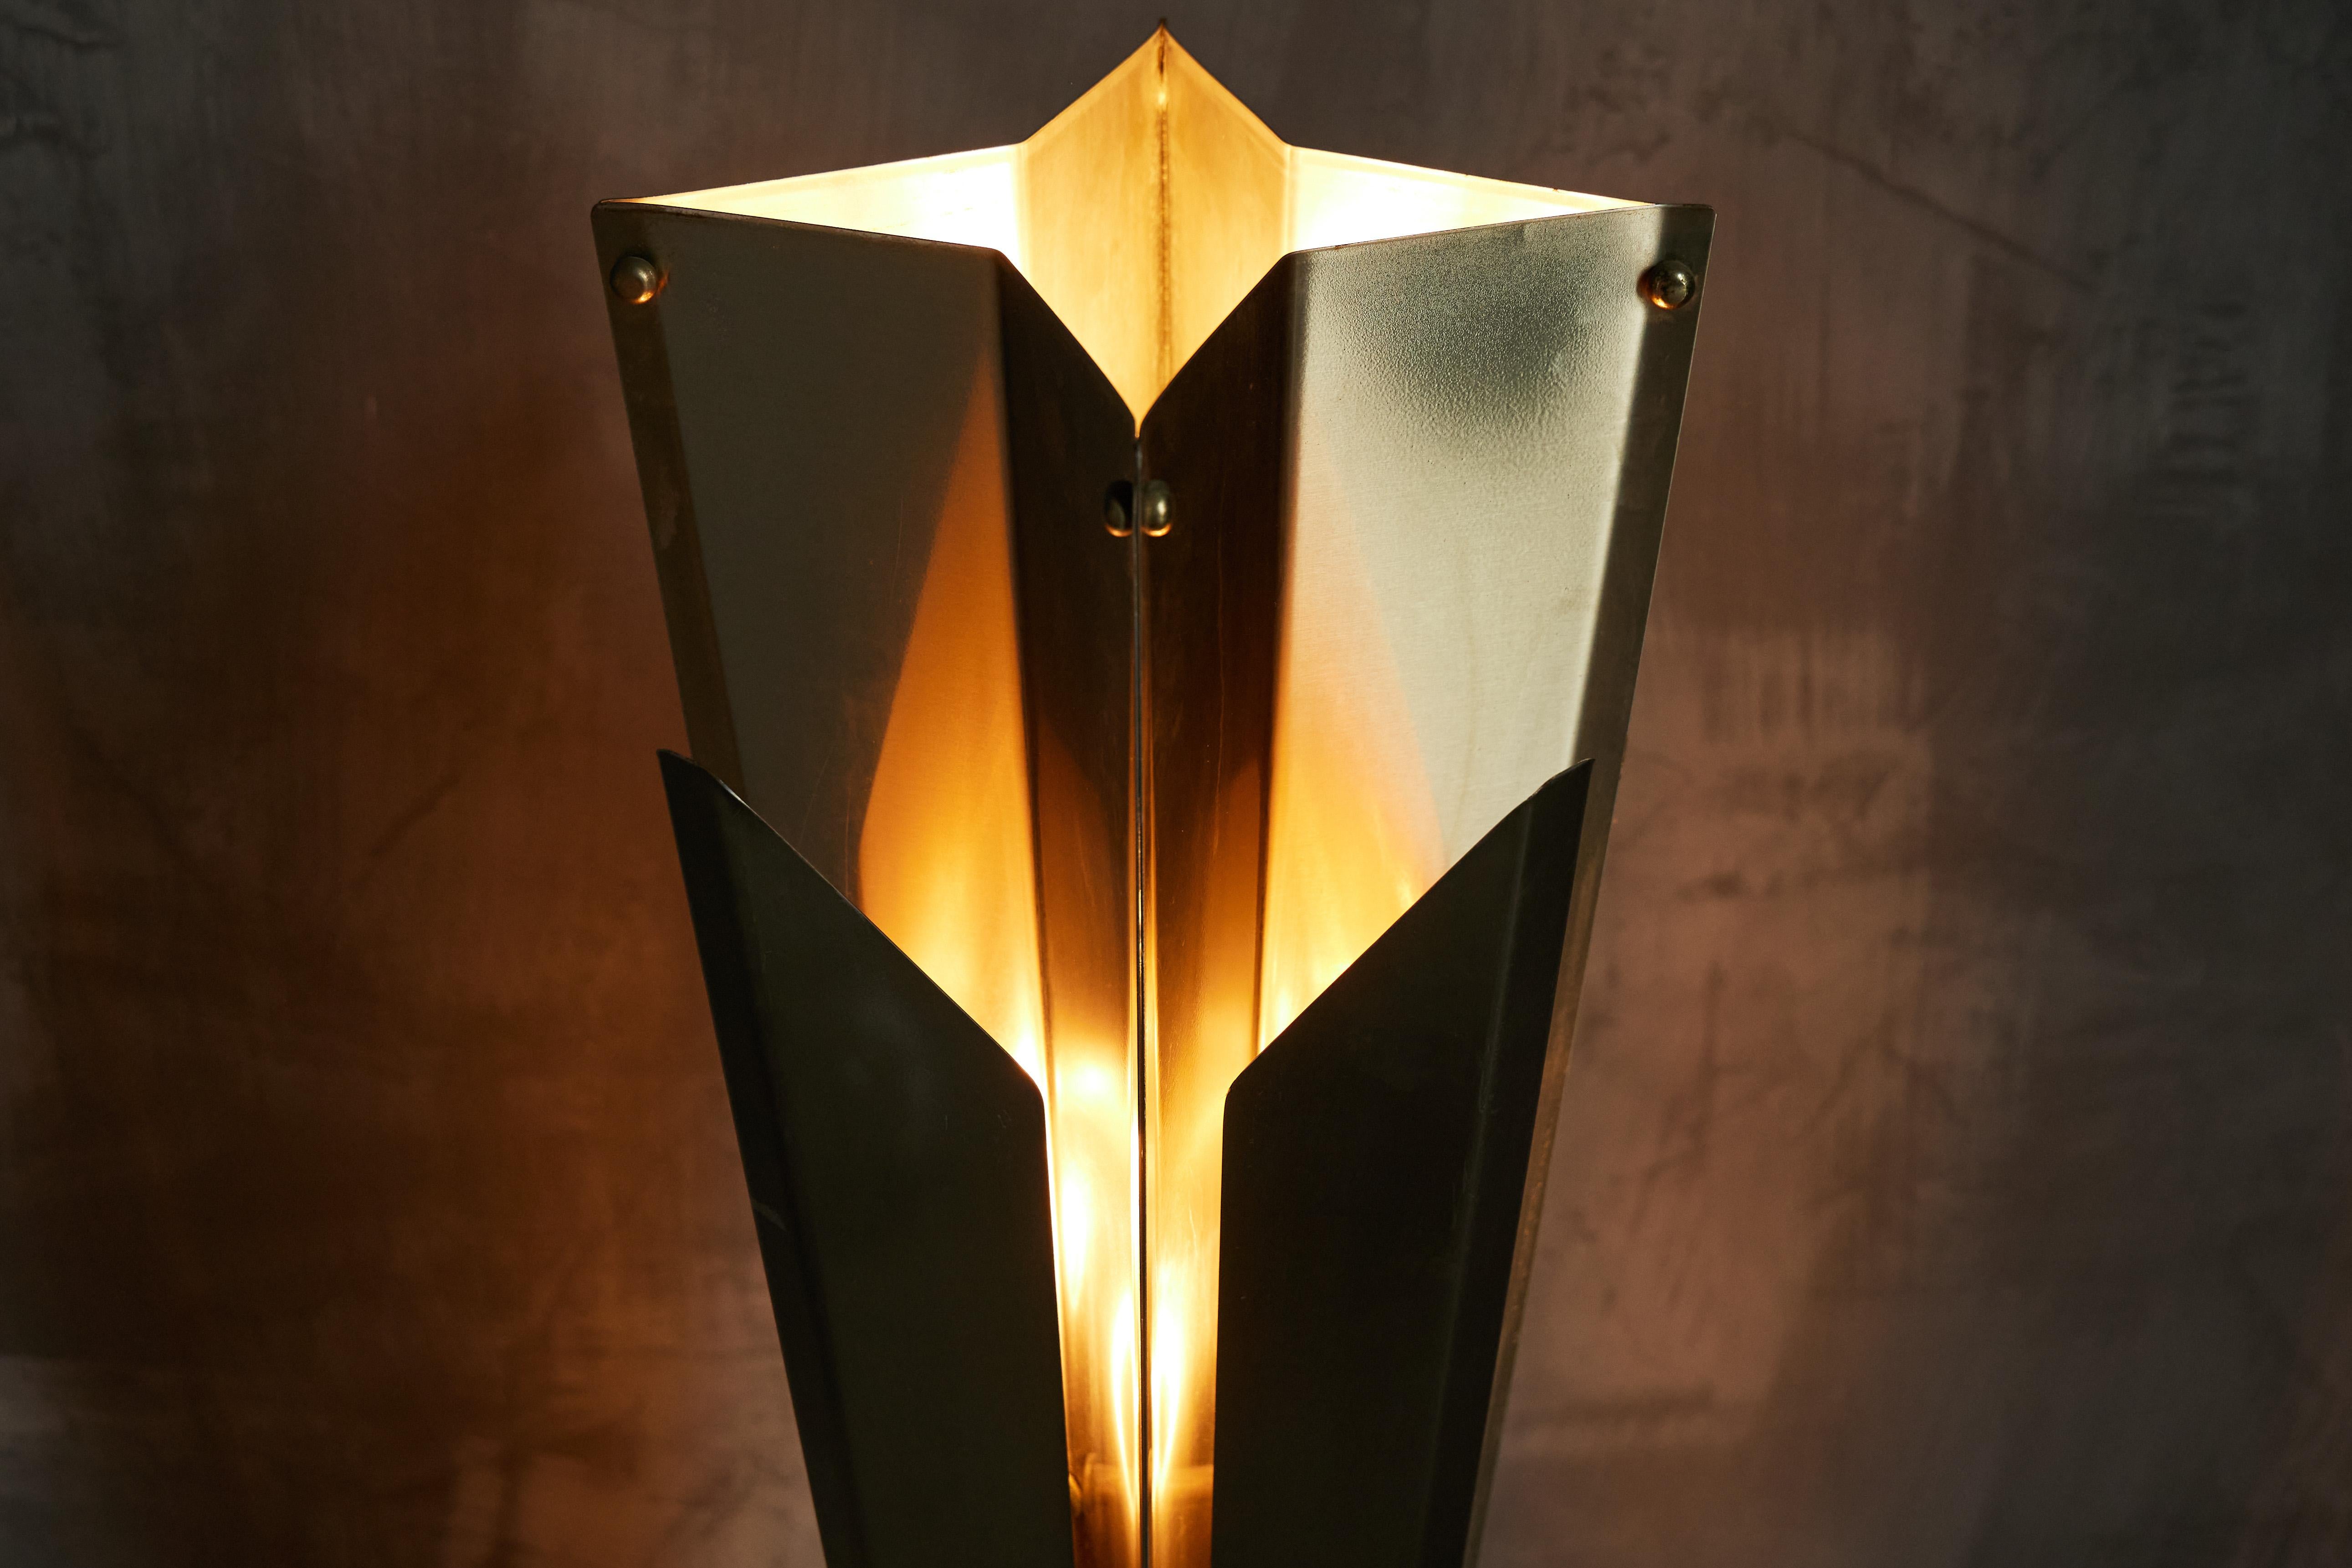 Hollywood Regency Maison Charles star-shaped floor lamp, a masterpiece hailing from the glamorous 1960s in France. Crafted from gleaming silver metal, this exceptional lamp captures the essence of Hollywood's golden age with its striking star-shaped